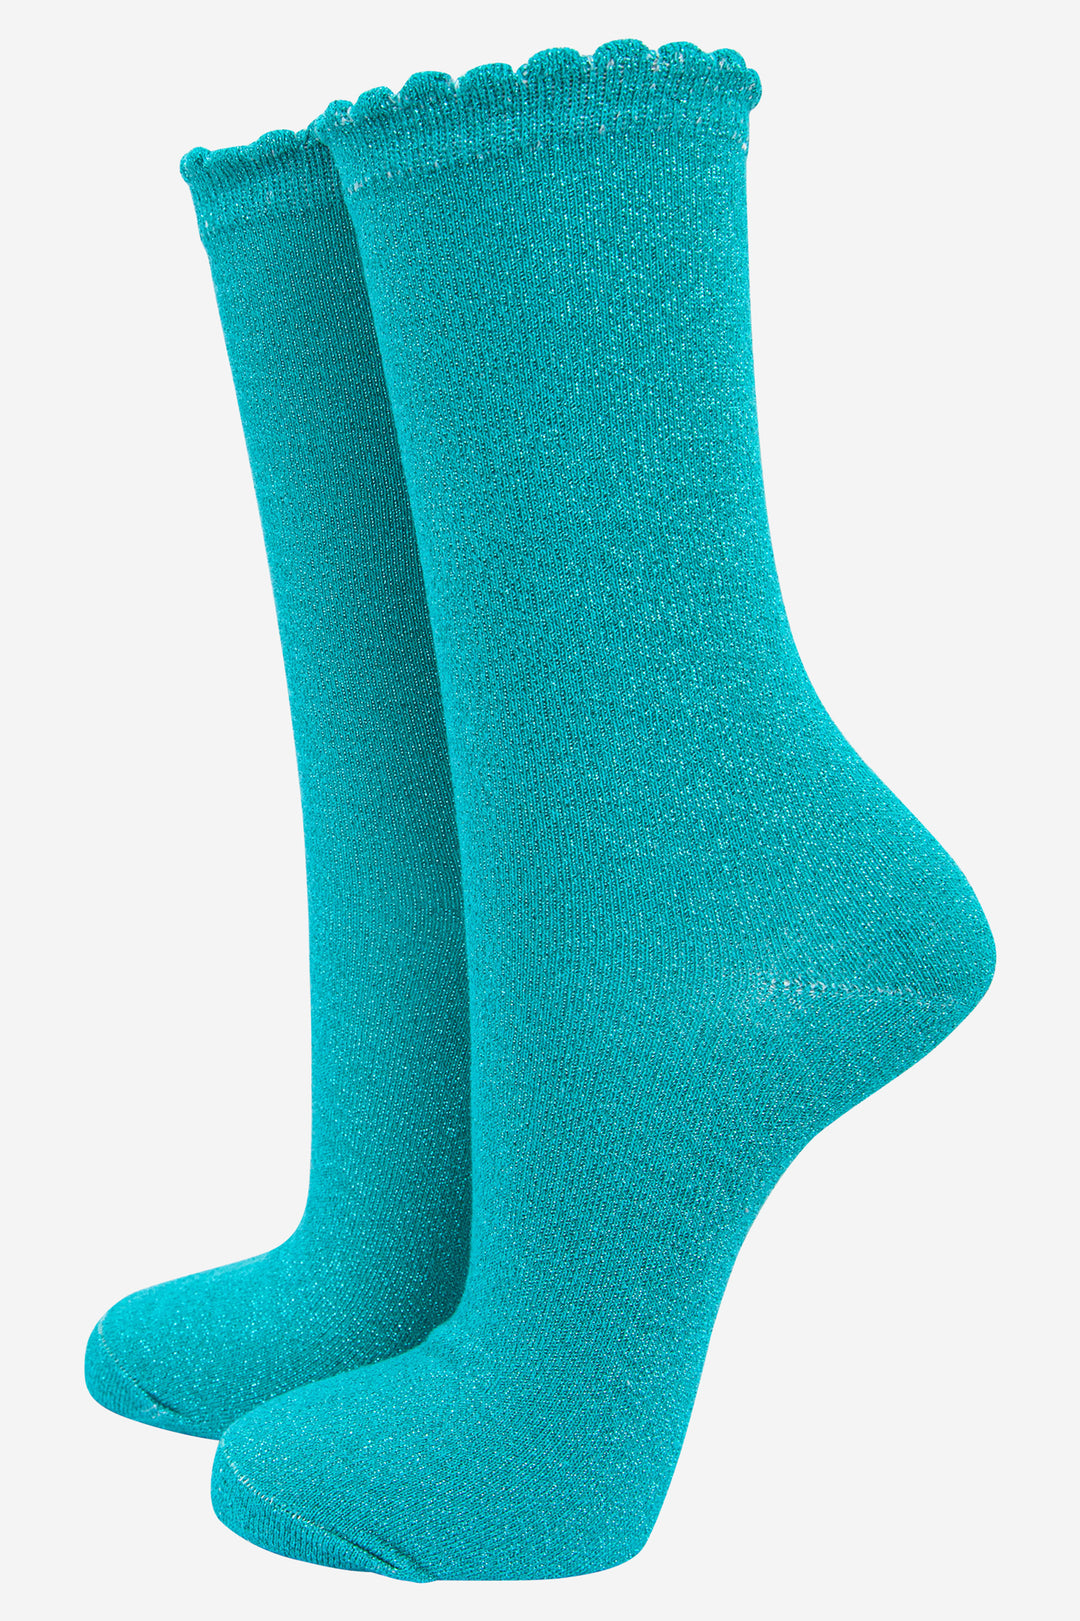 aqua blue ankle socks with an all over glitter sparkle and scalloped cuffs